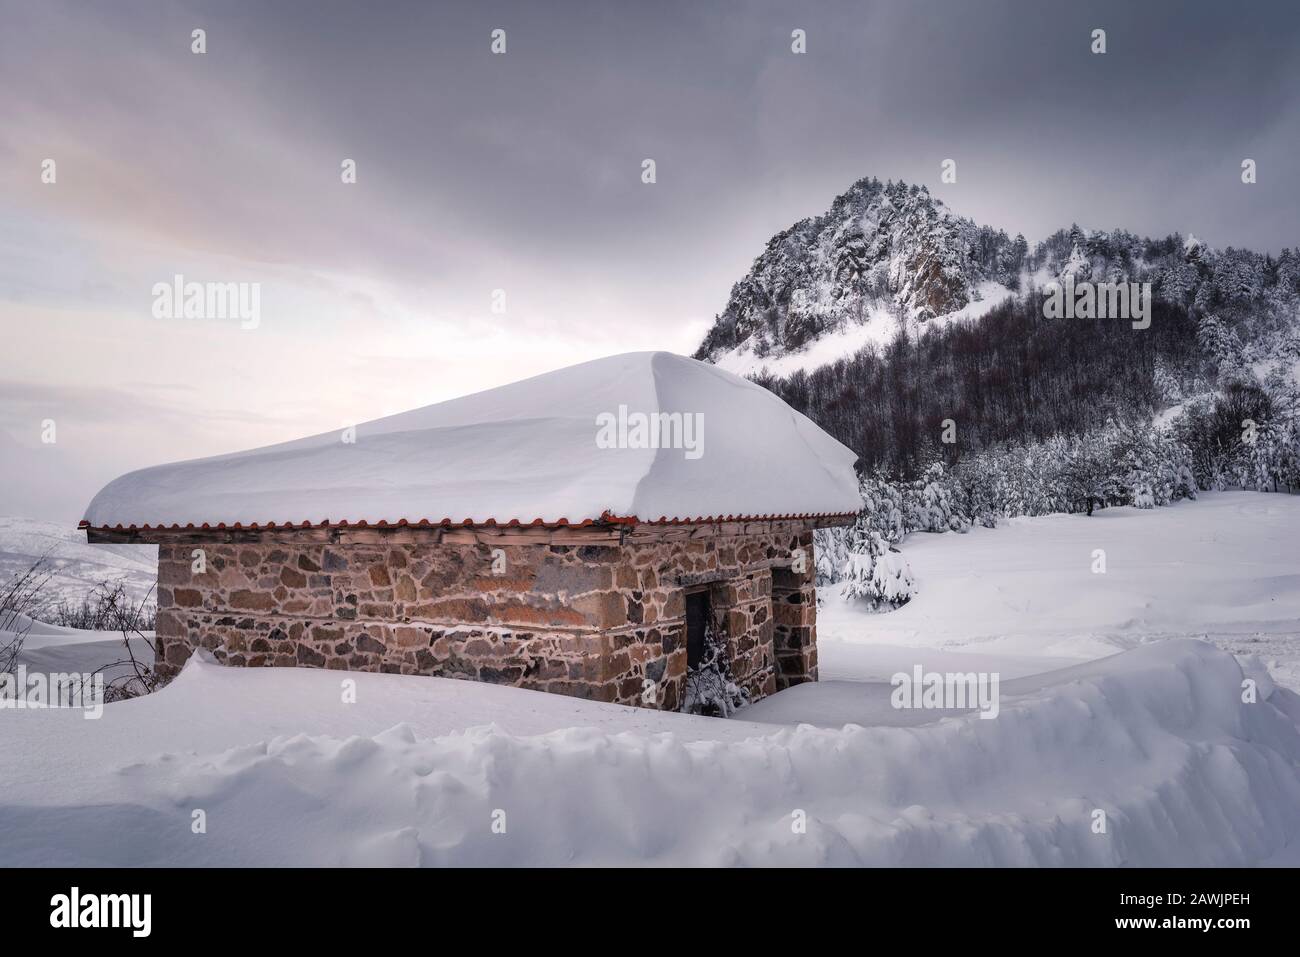 White snow covering a stone house under winter cloudy sky Stock Photo